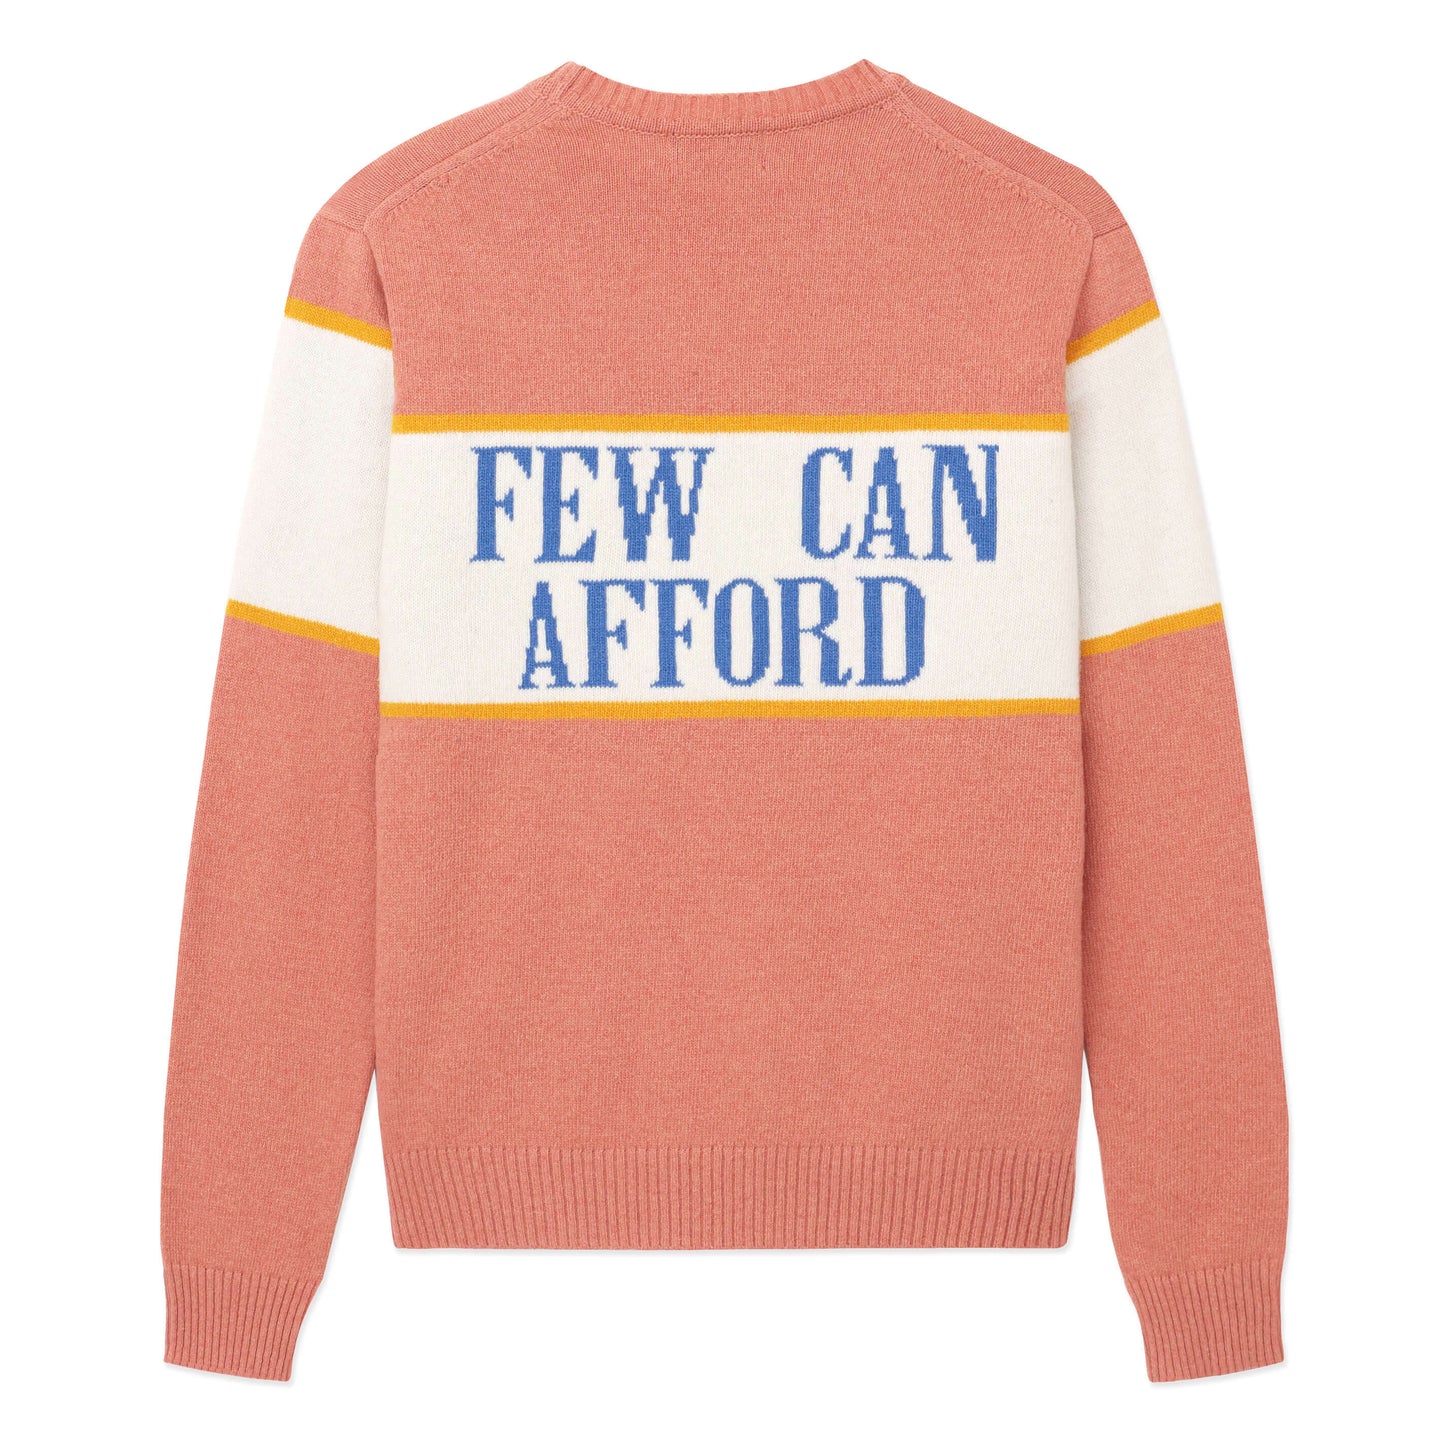 Pink sweater with "Few Can Afford" across the back.